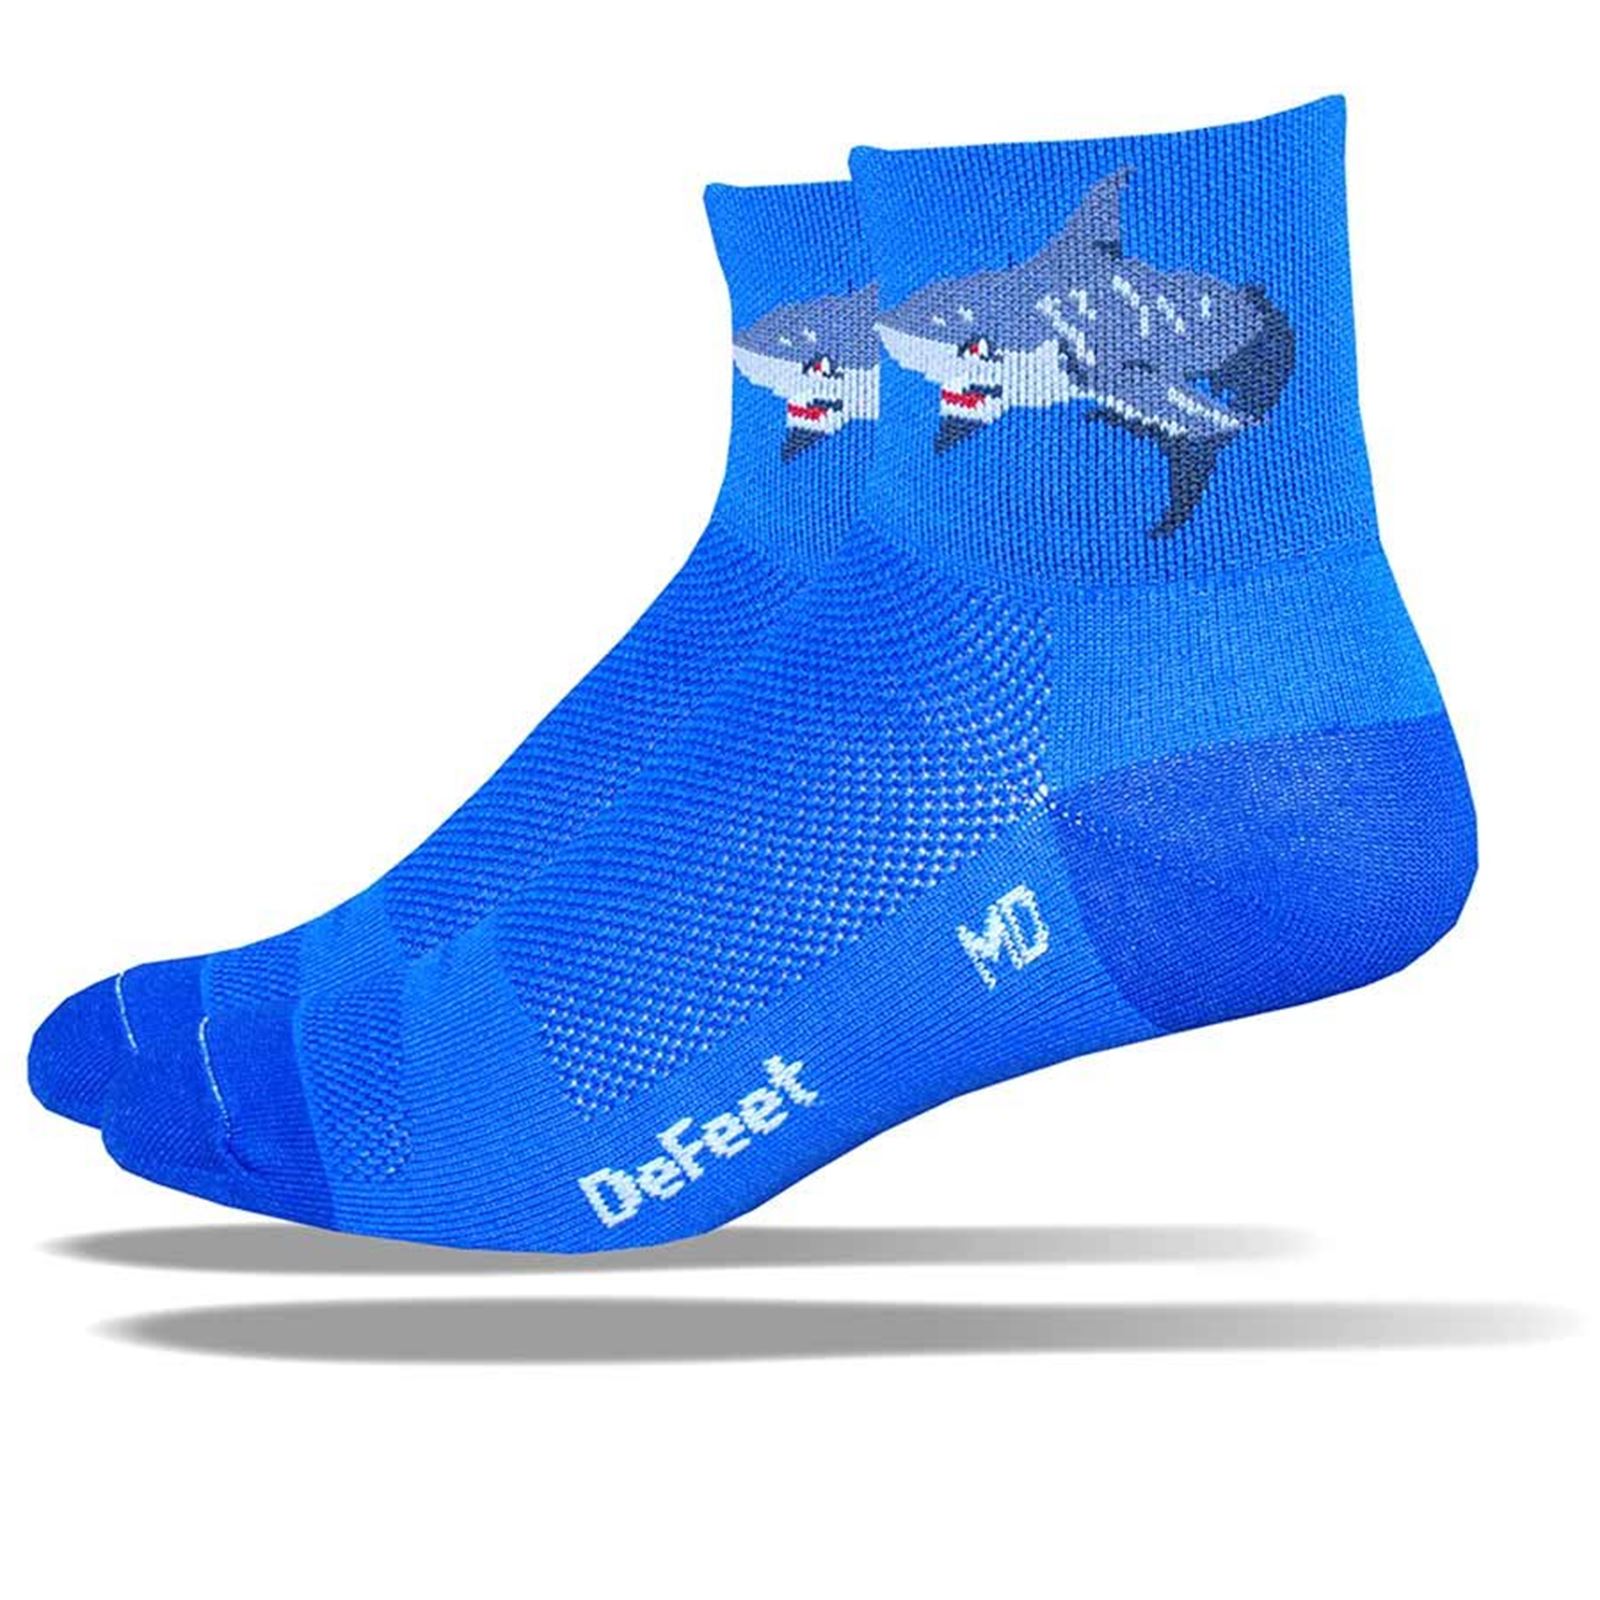 DeFeet Aireator Attack! Socks - Blue - Large - 2.5" Cuff